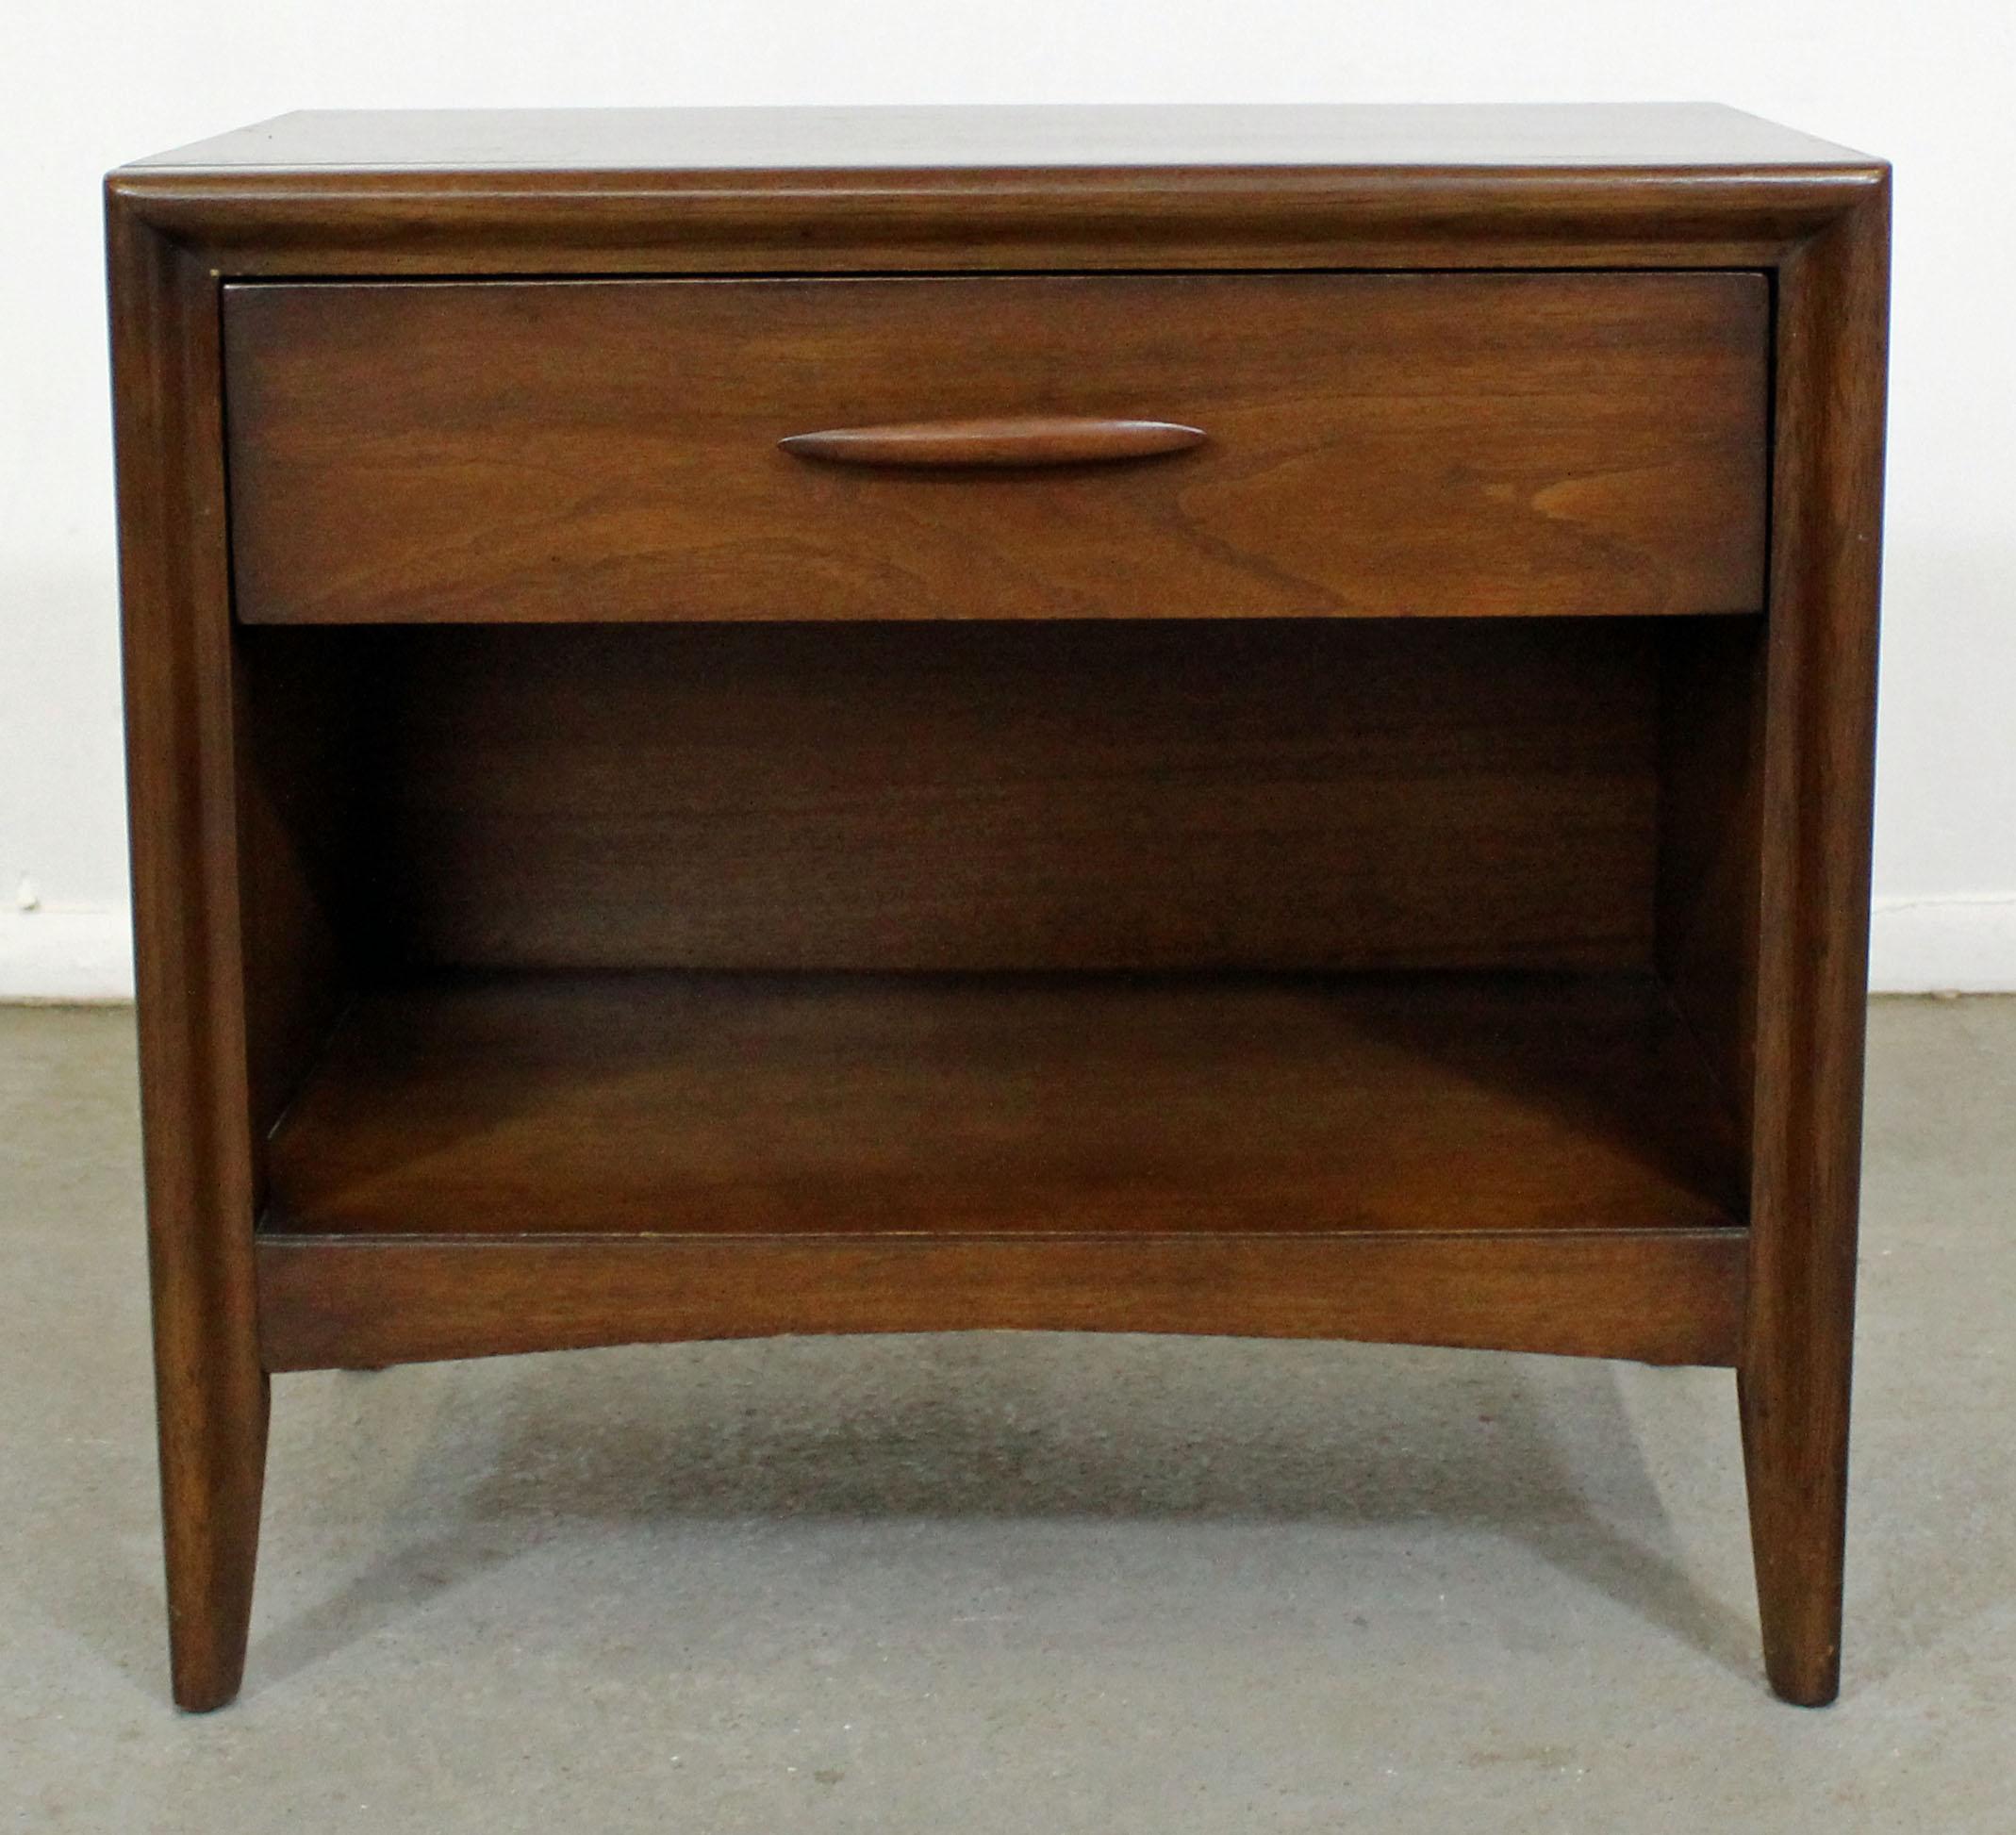 Offered is a pair of vintage 1960s Broyhill Emphasis nightstands. They are made of walnut, each featuring a single drawer up top with a sculpted pull. It is in good condition, showing minor age wear (surface scratches/wear, age wear-- see pictures).